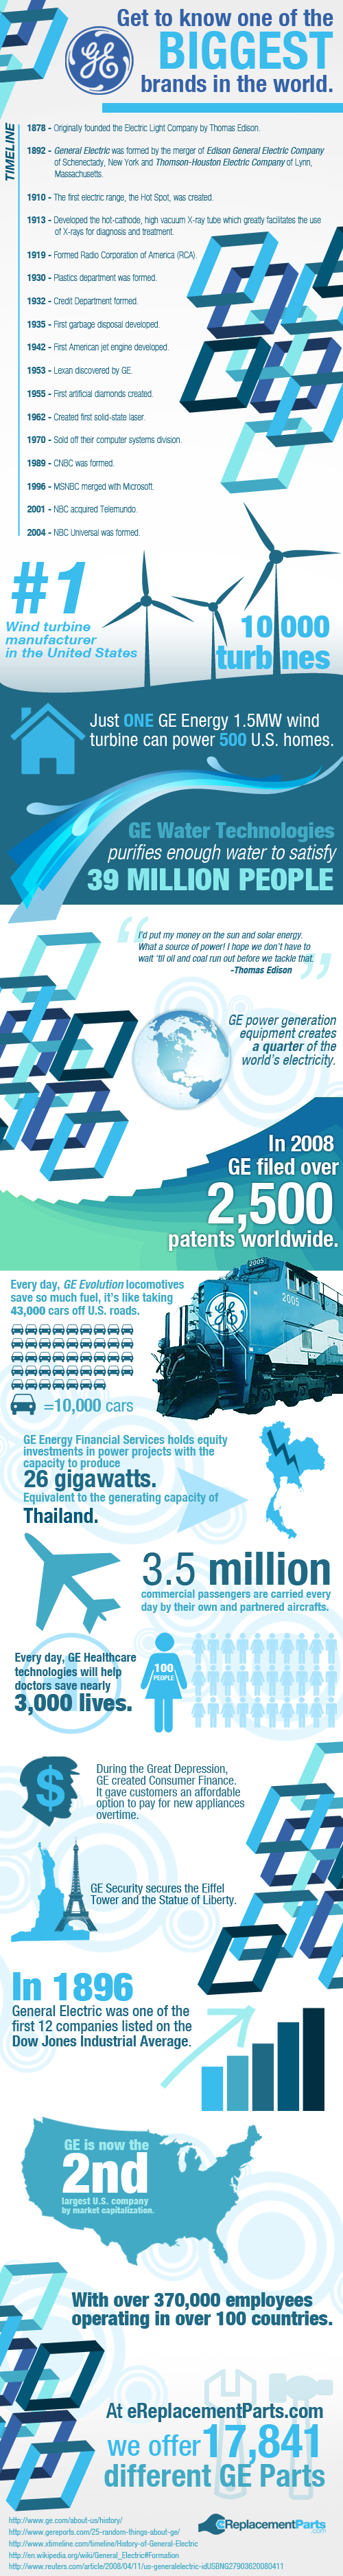 GE: The Biggest Brand in the World